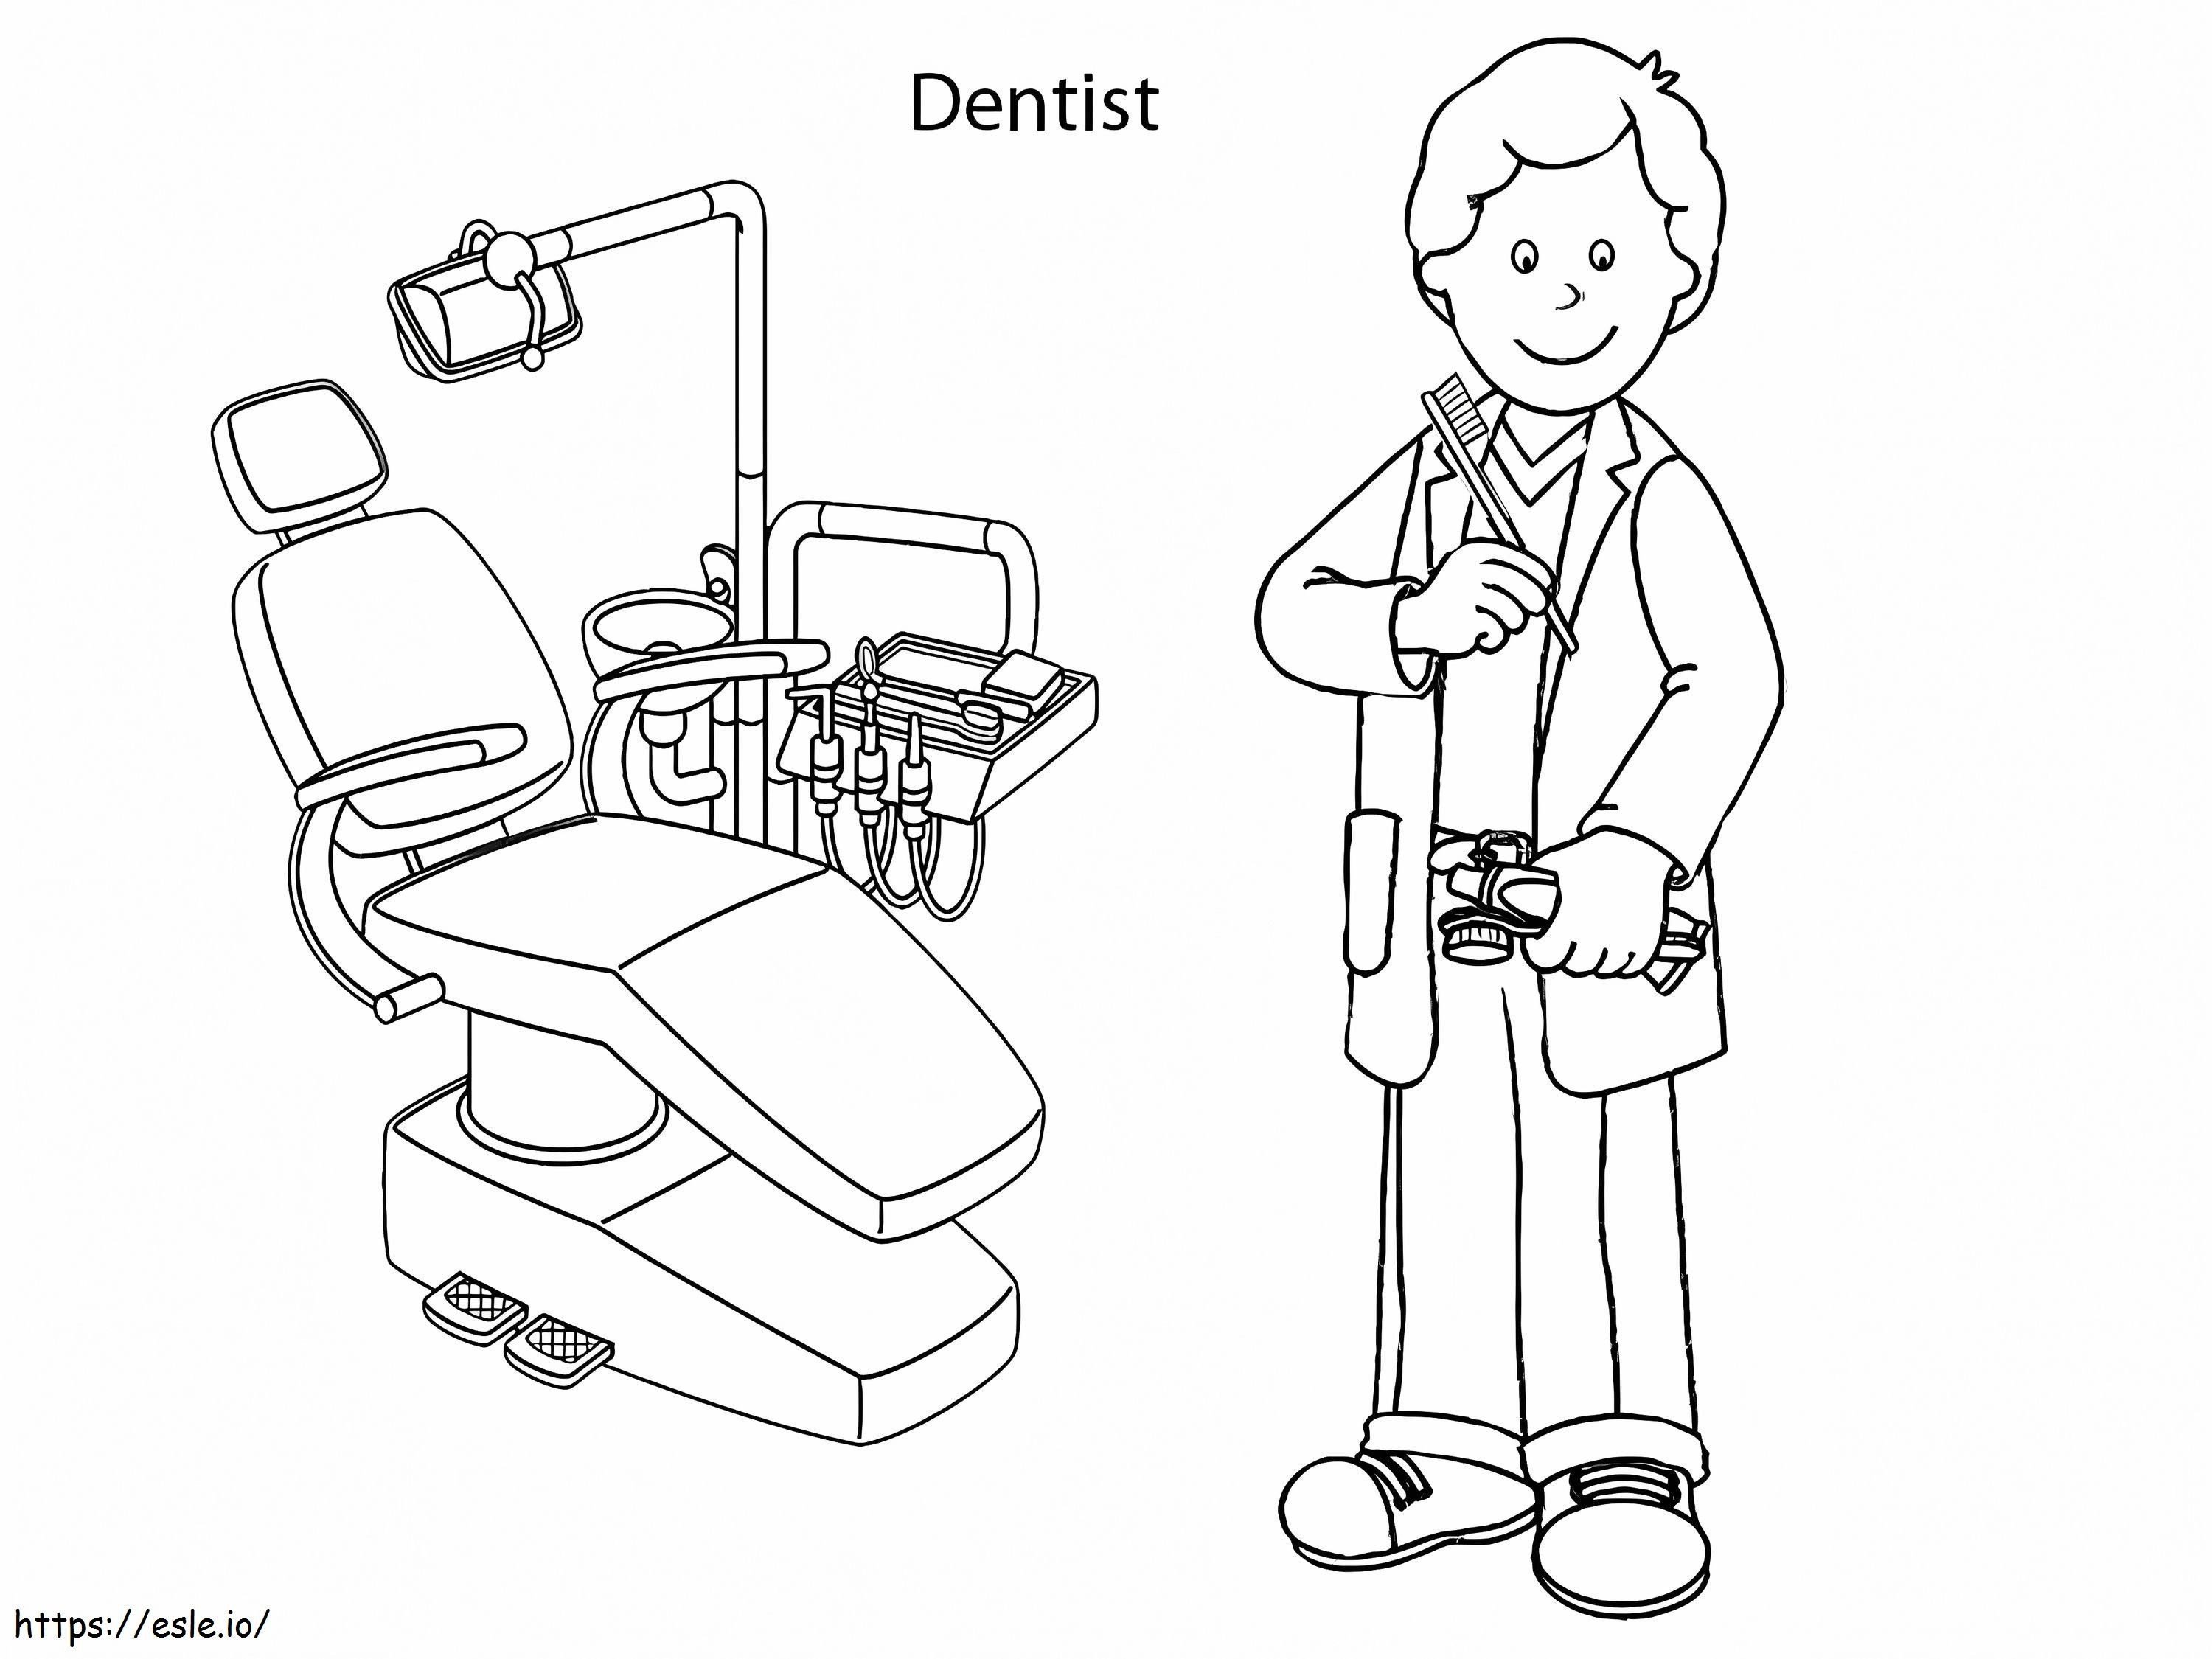 Male Dentist coloring page